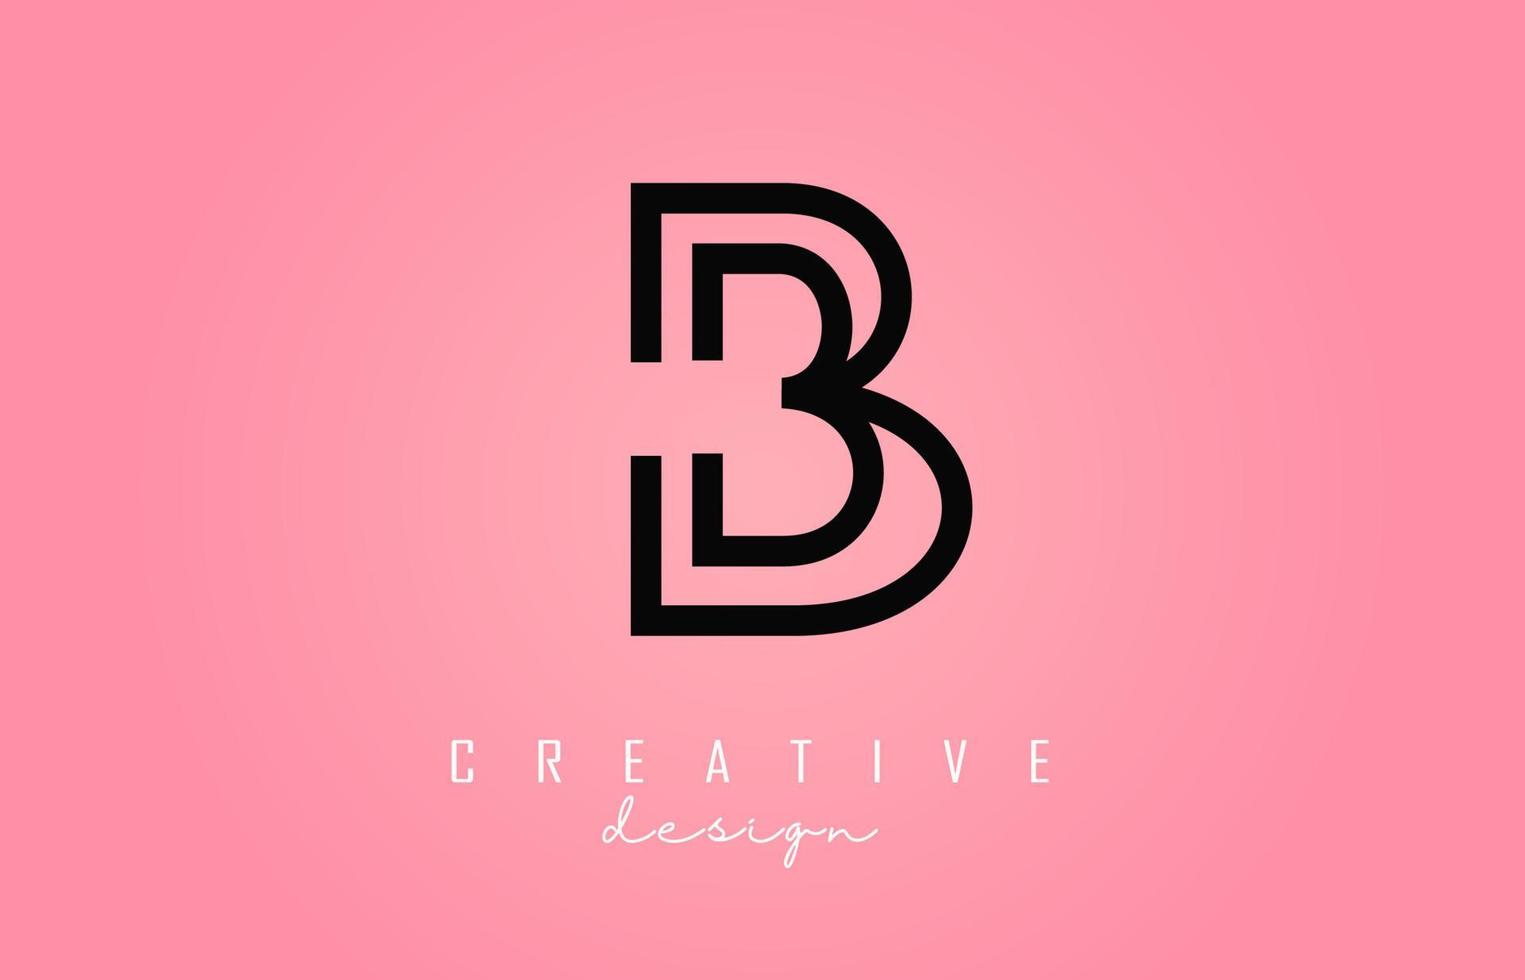 Black B Letter Logo Monogram Vector Design. Creative B Letter Icon with colorful gradient background.